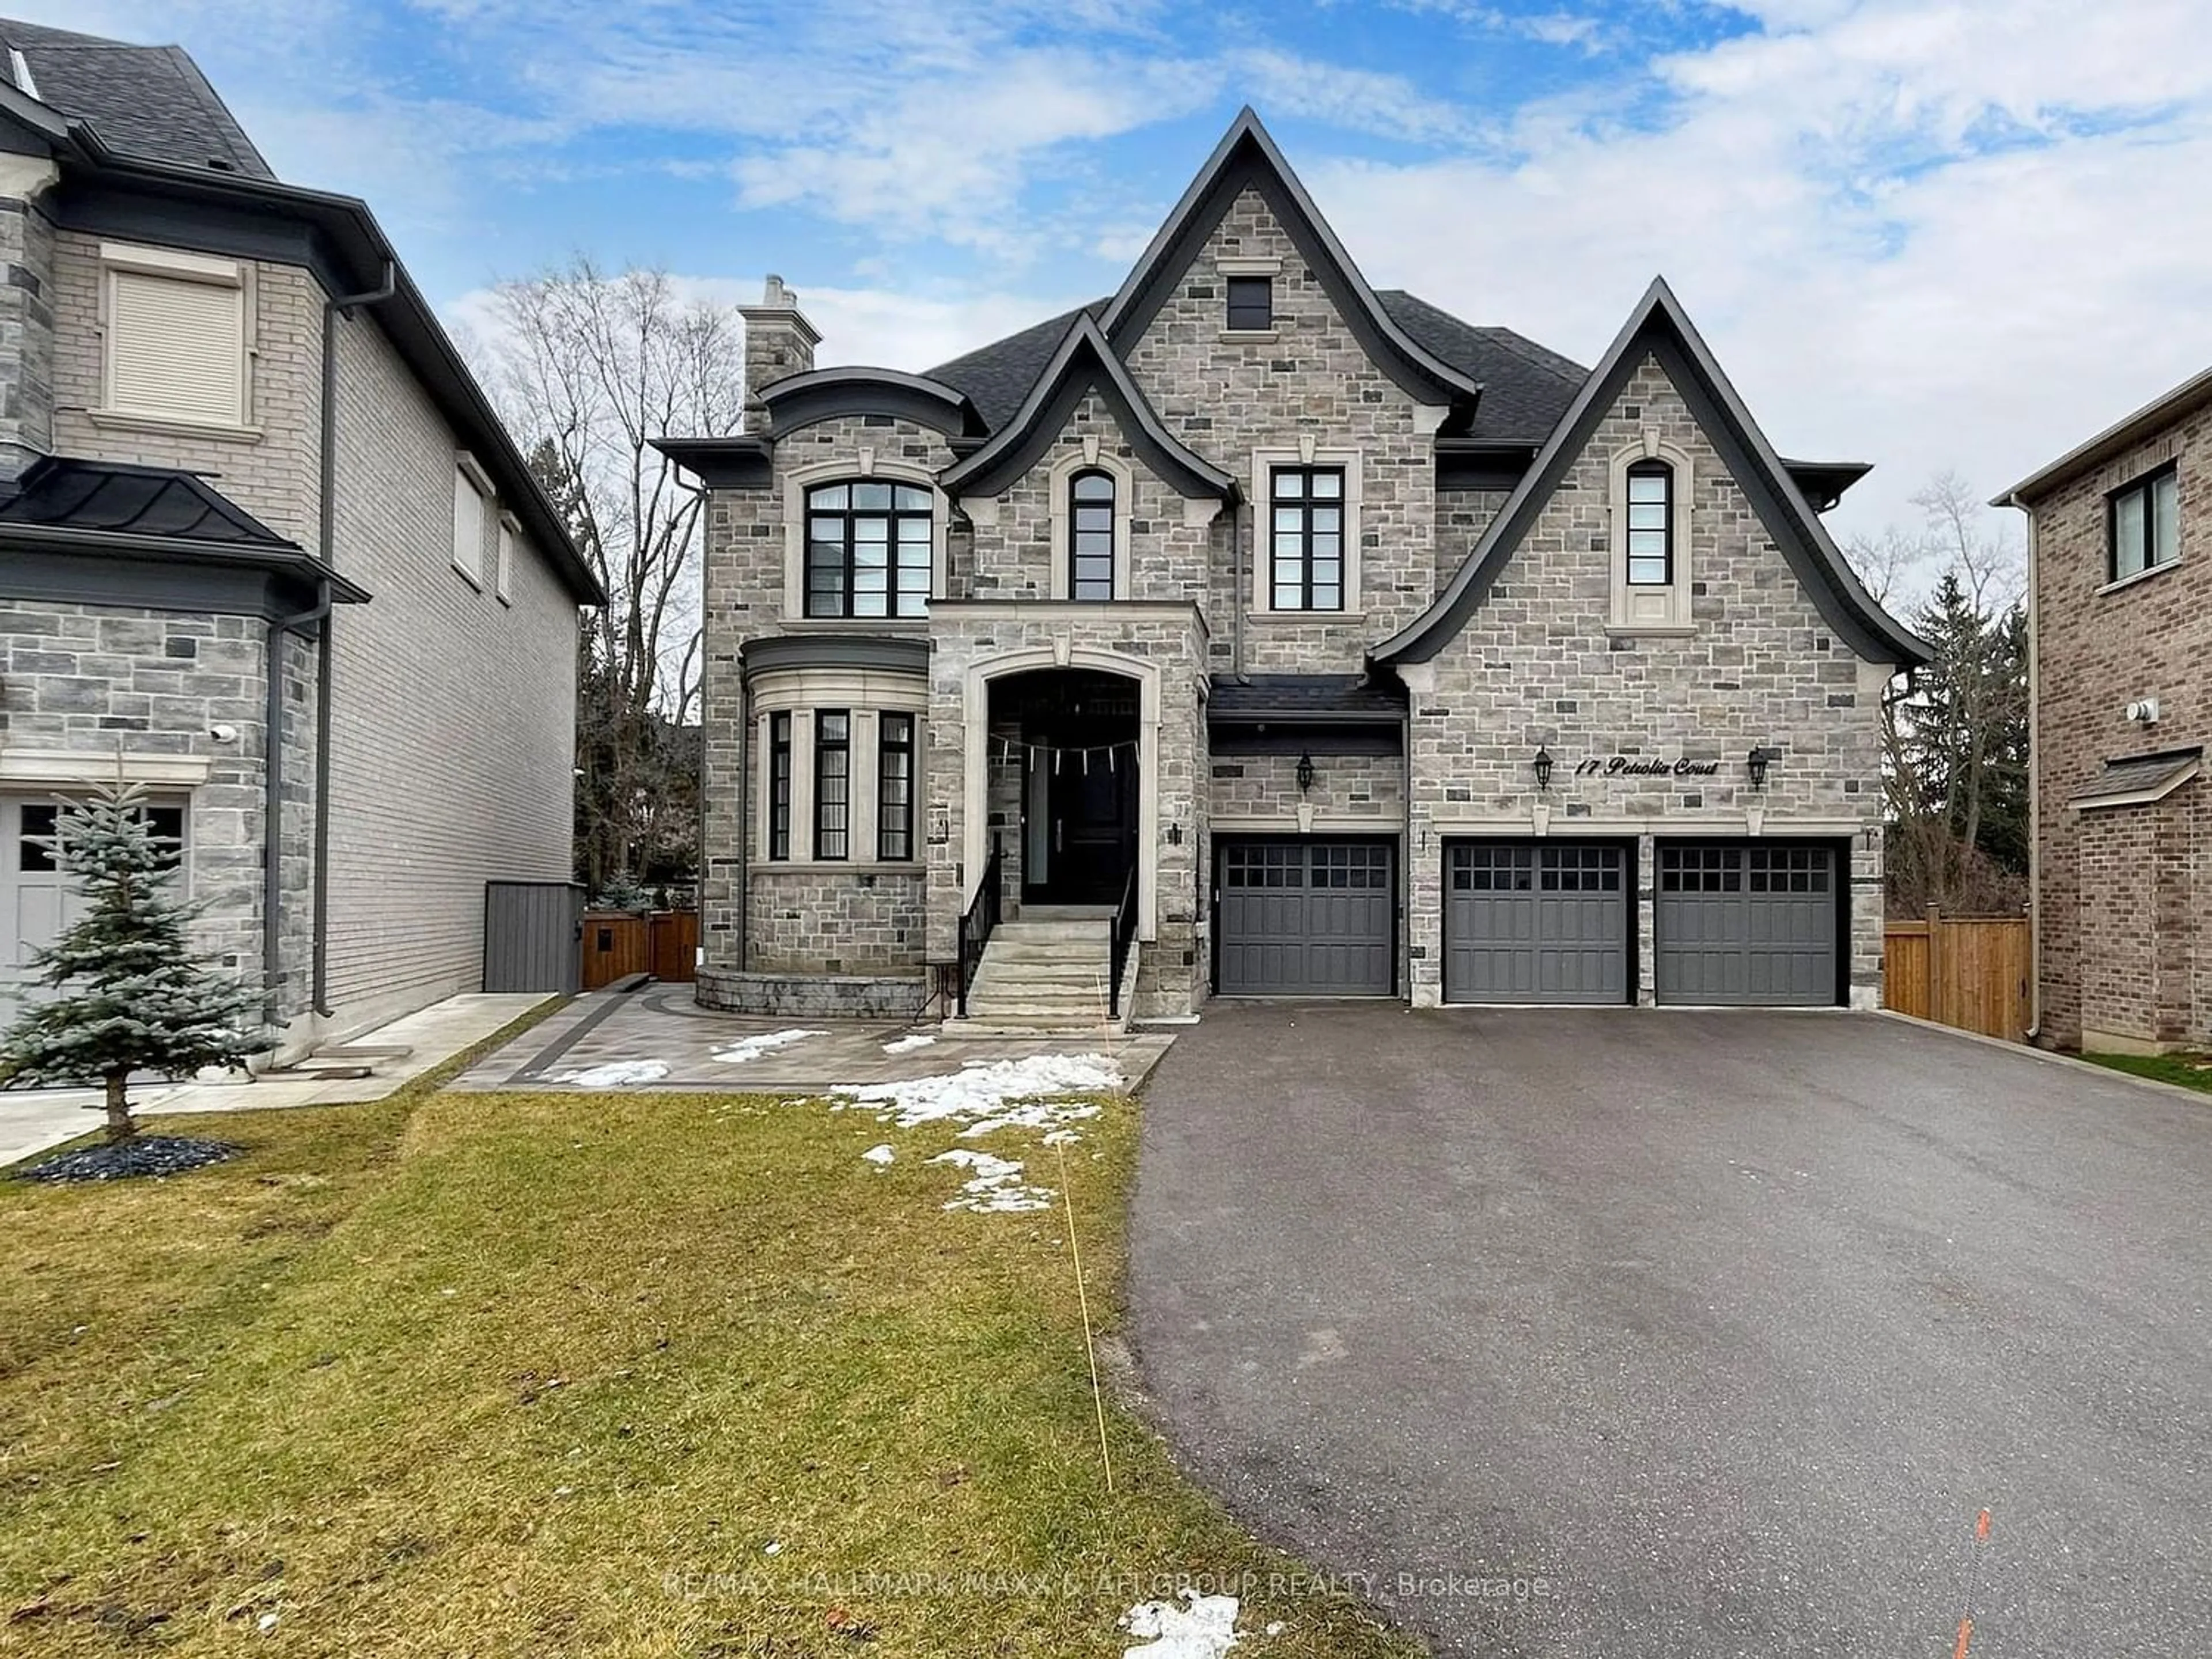 Home with stone exterior material for 17 Petrolia Crt, Richmond Hill Ontario L4C 0C2